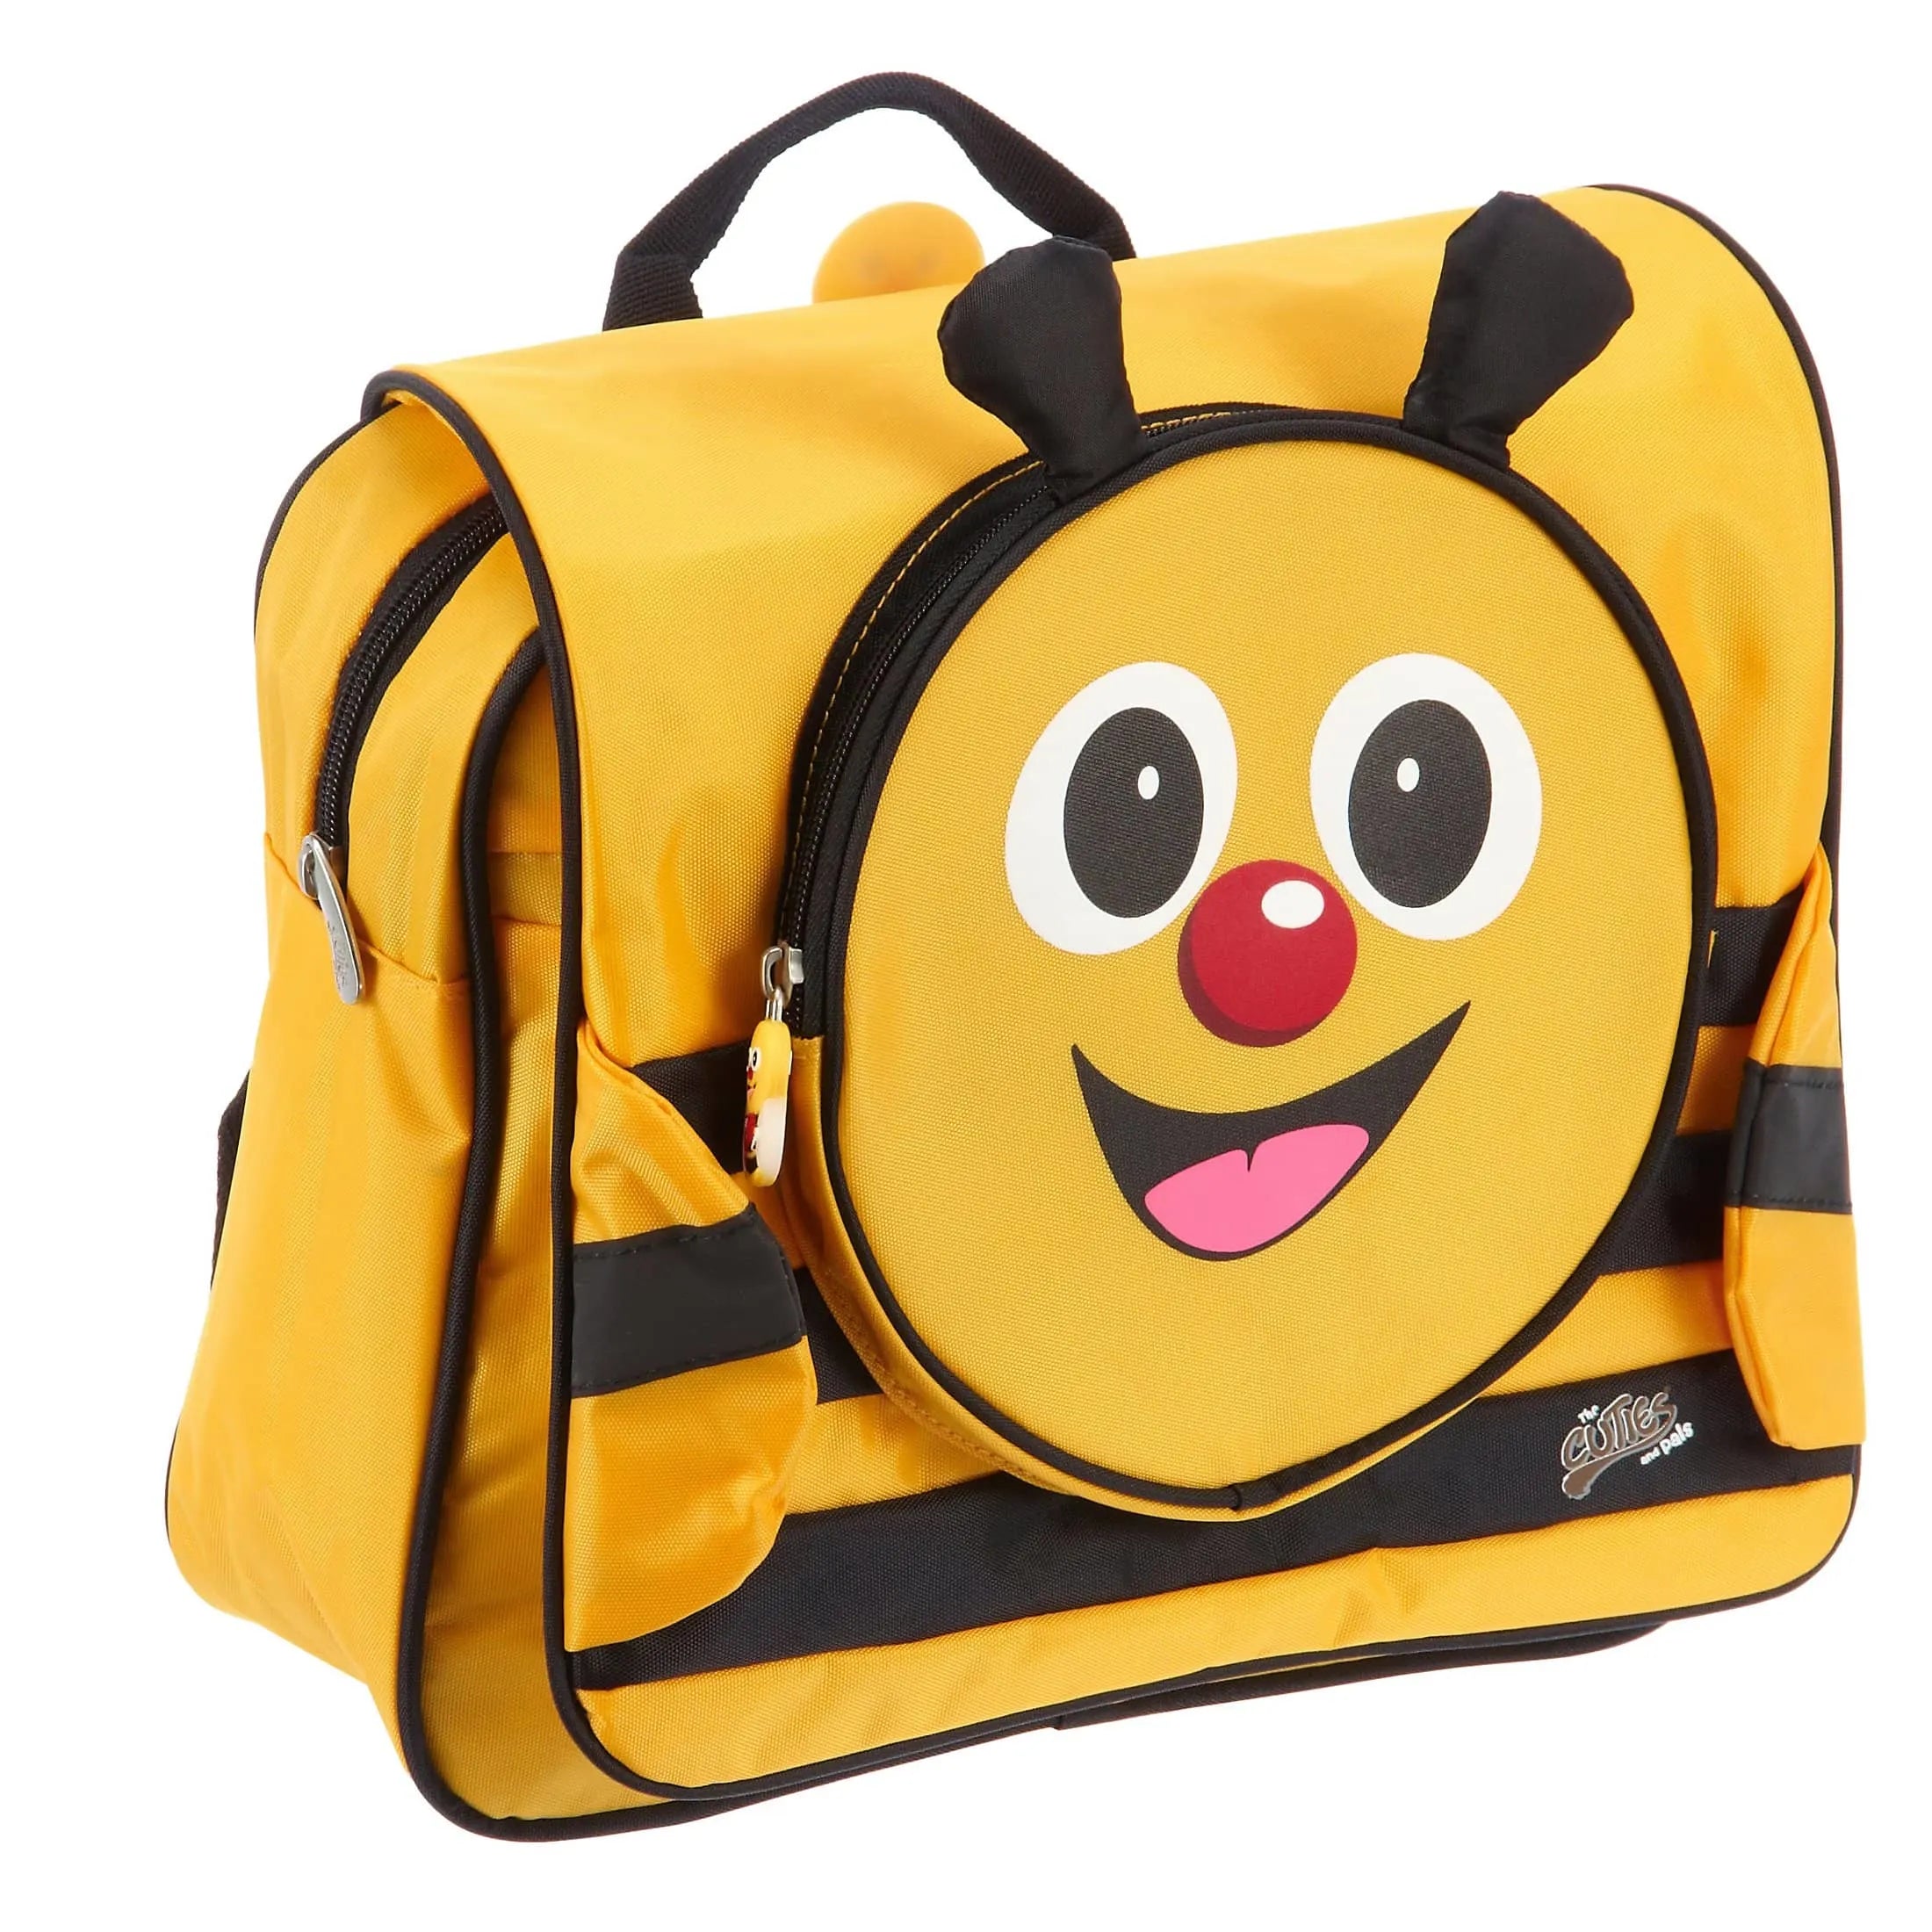 The Cuties and Pals Soft Cuties backpack 30 cm - Bee